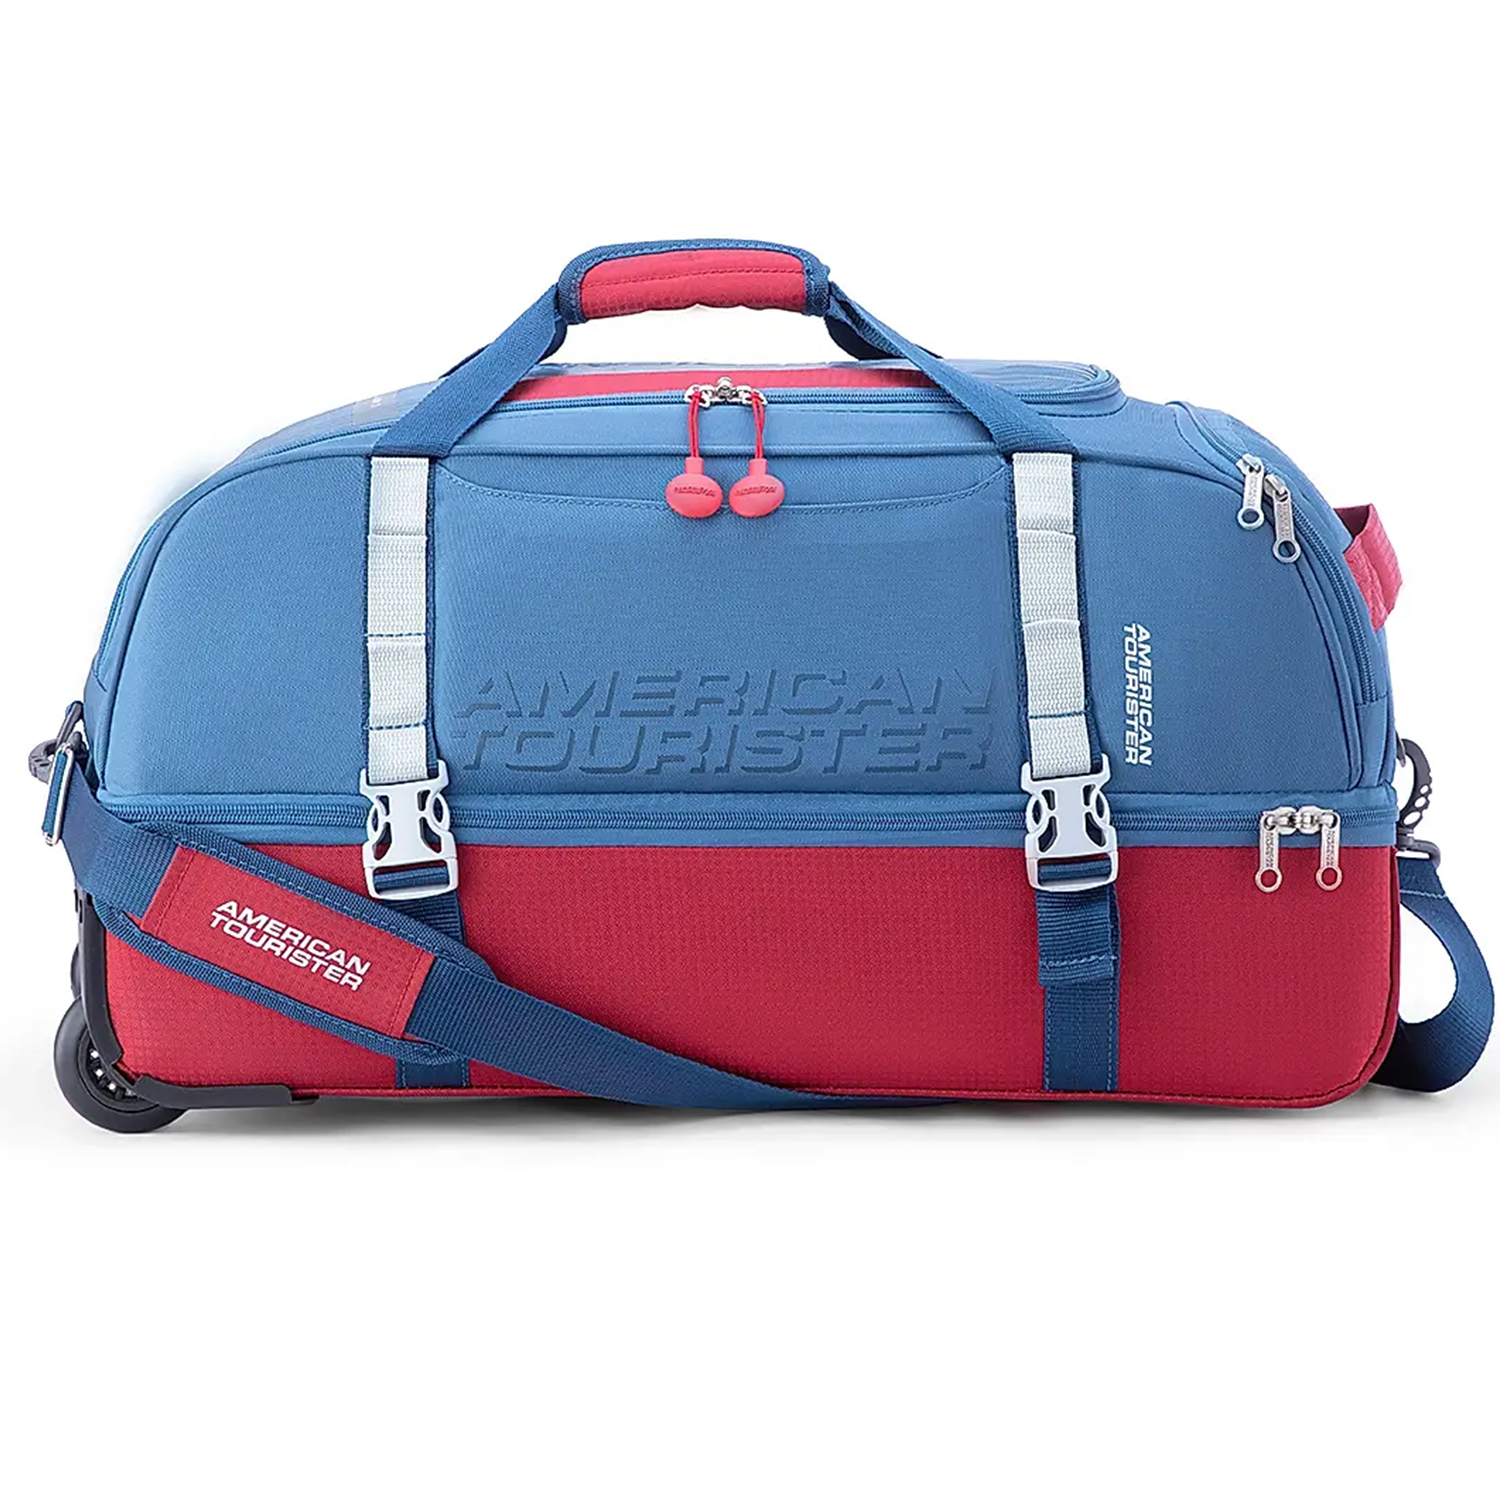 American Tourister is one of the best! - American Tourister suitcase store  - buy a suitcase in the company's online store